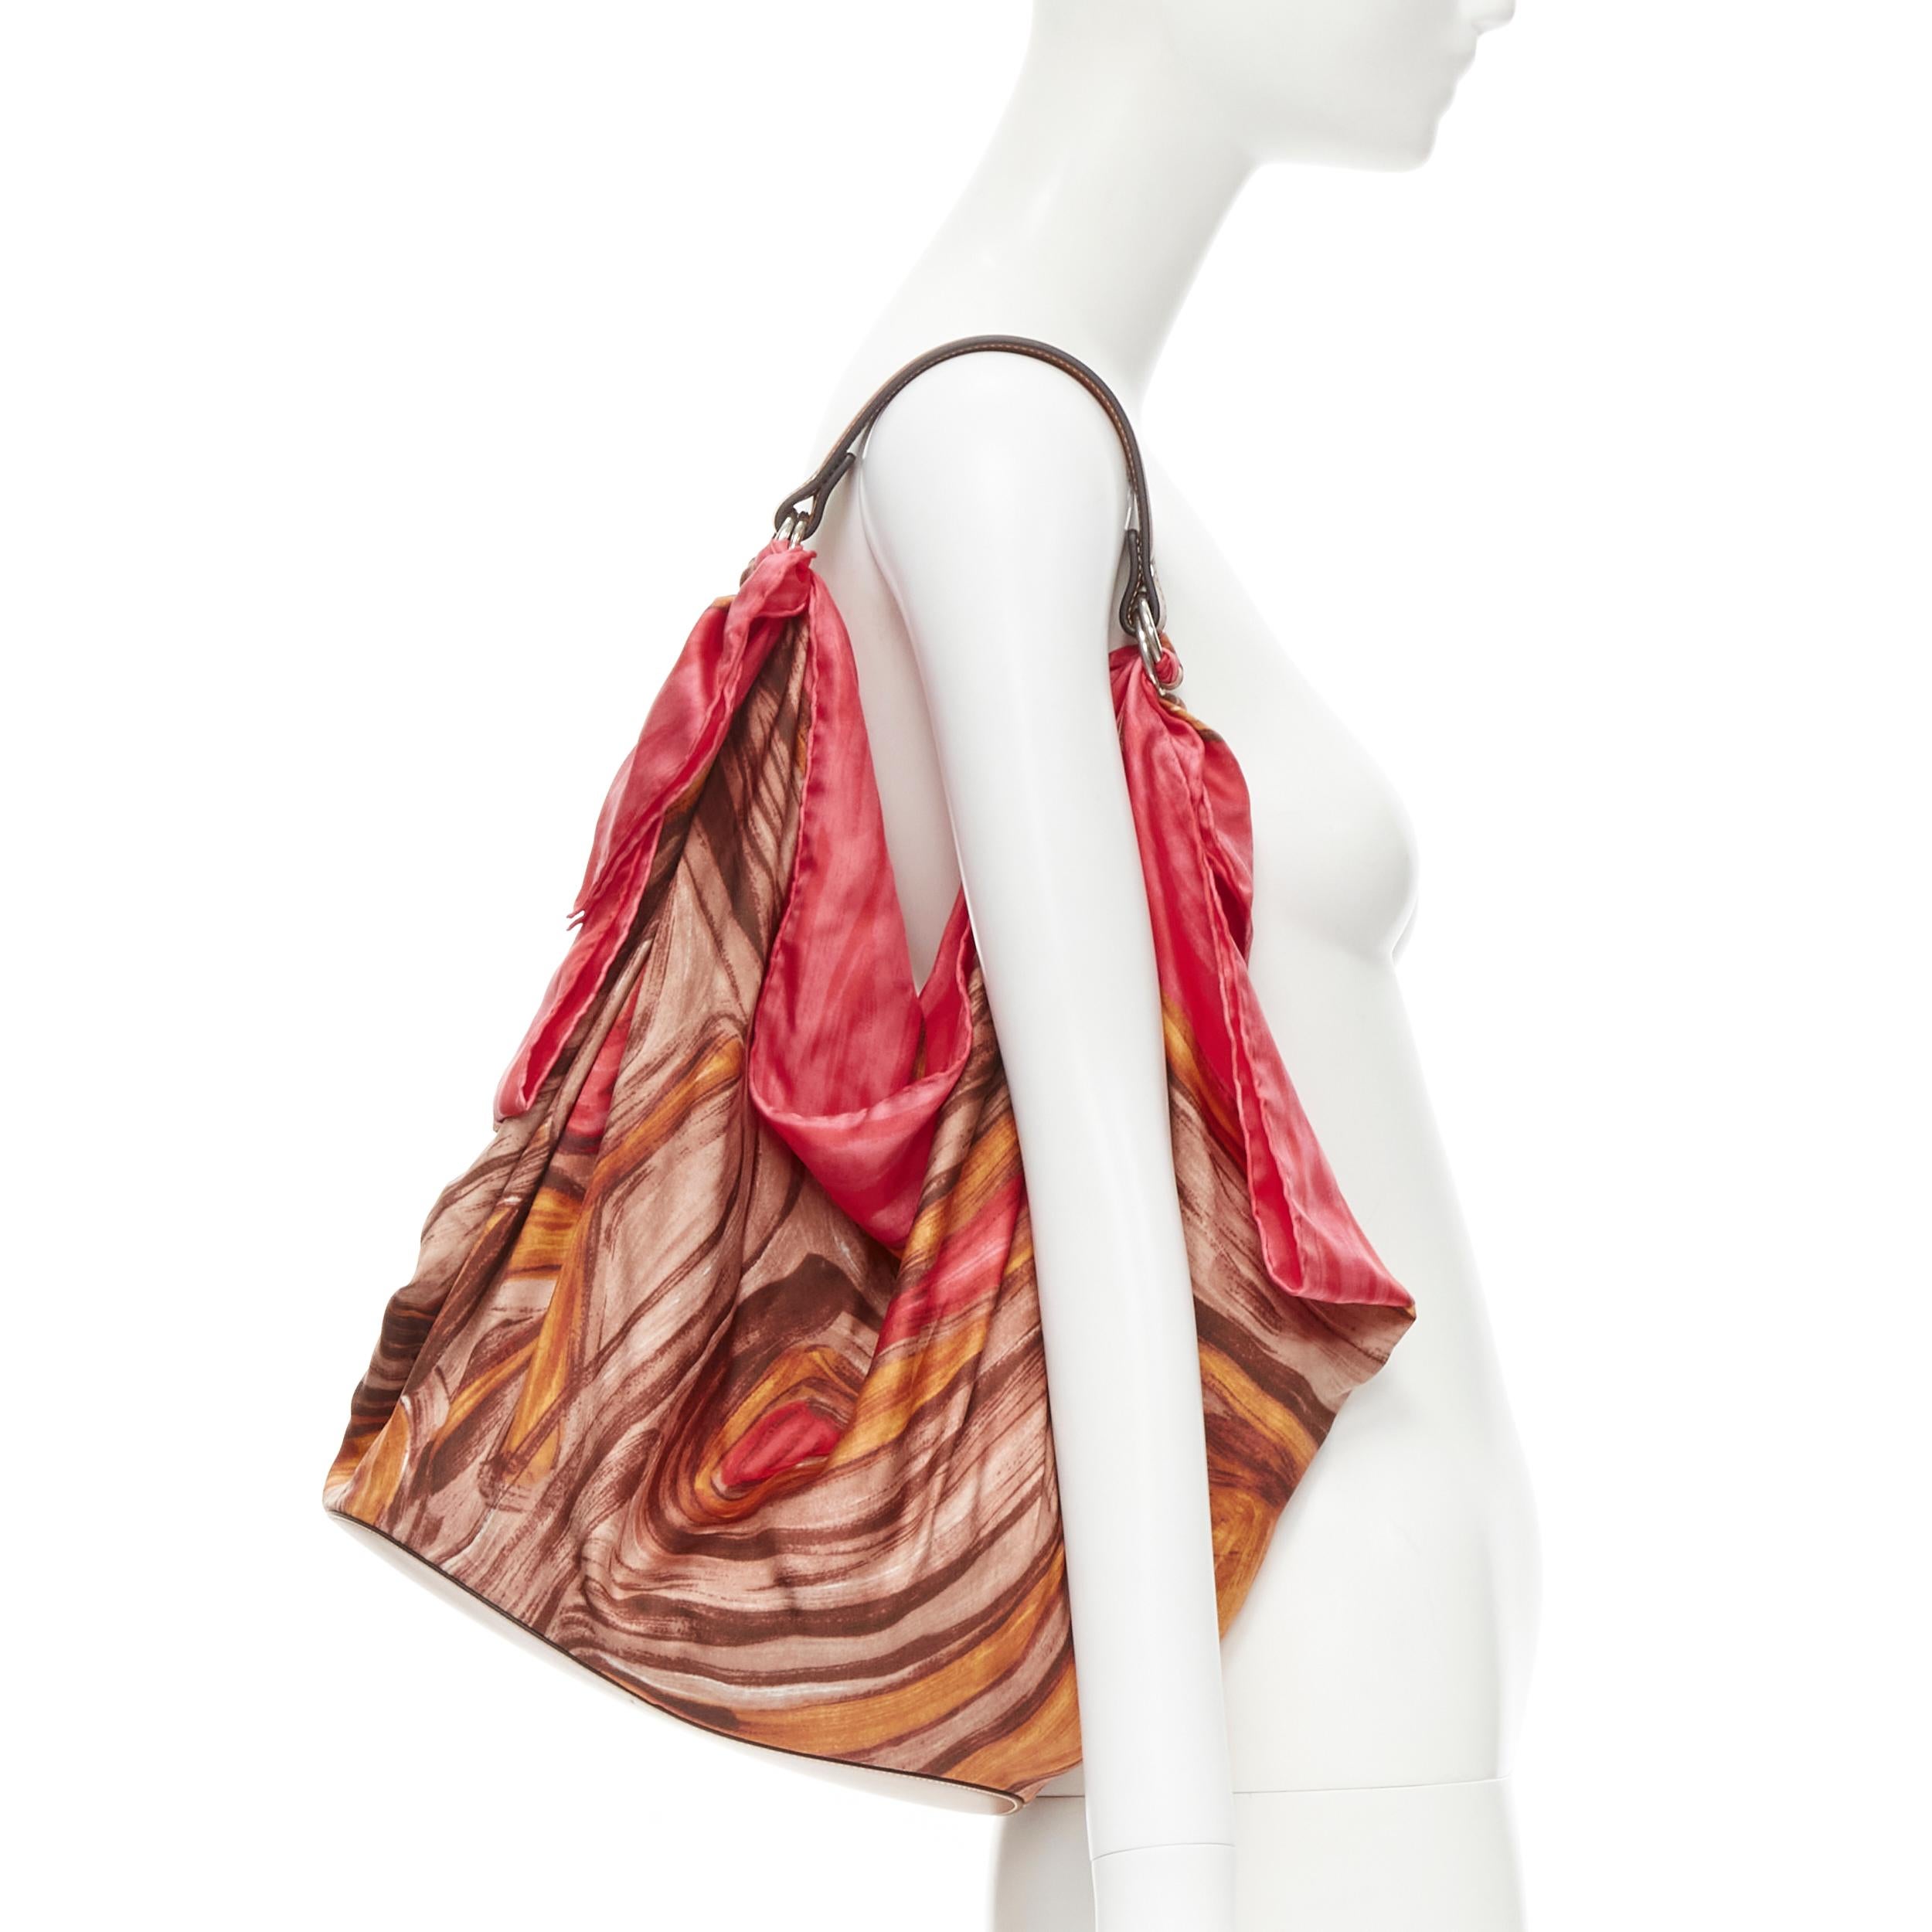 new OLD CELINE Phoebe Philo pink abstract print silk scarf brown leather bag 
Reference: TGAS/B01999 
Brand: Celine 
Designer: Phoebe Philo 
Model: Scarf bag 
Material: Silk 
Color: Pink 
Pattern: Abstract 
Extra Detail: Brown leather handle and